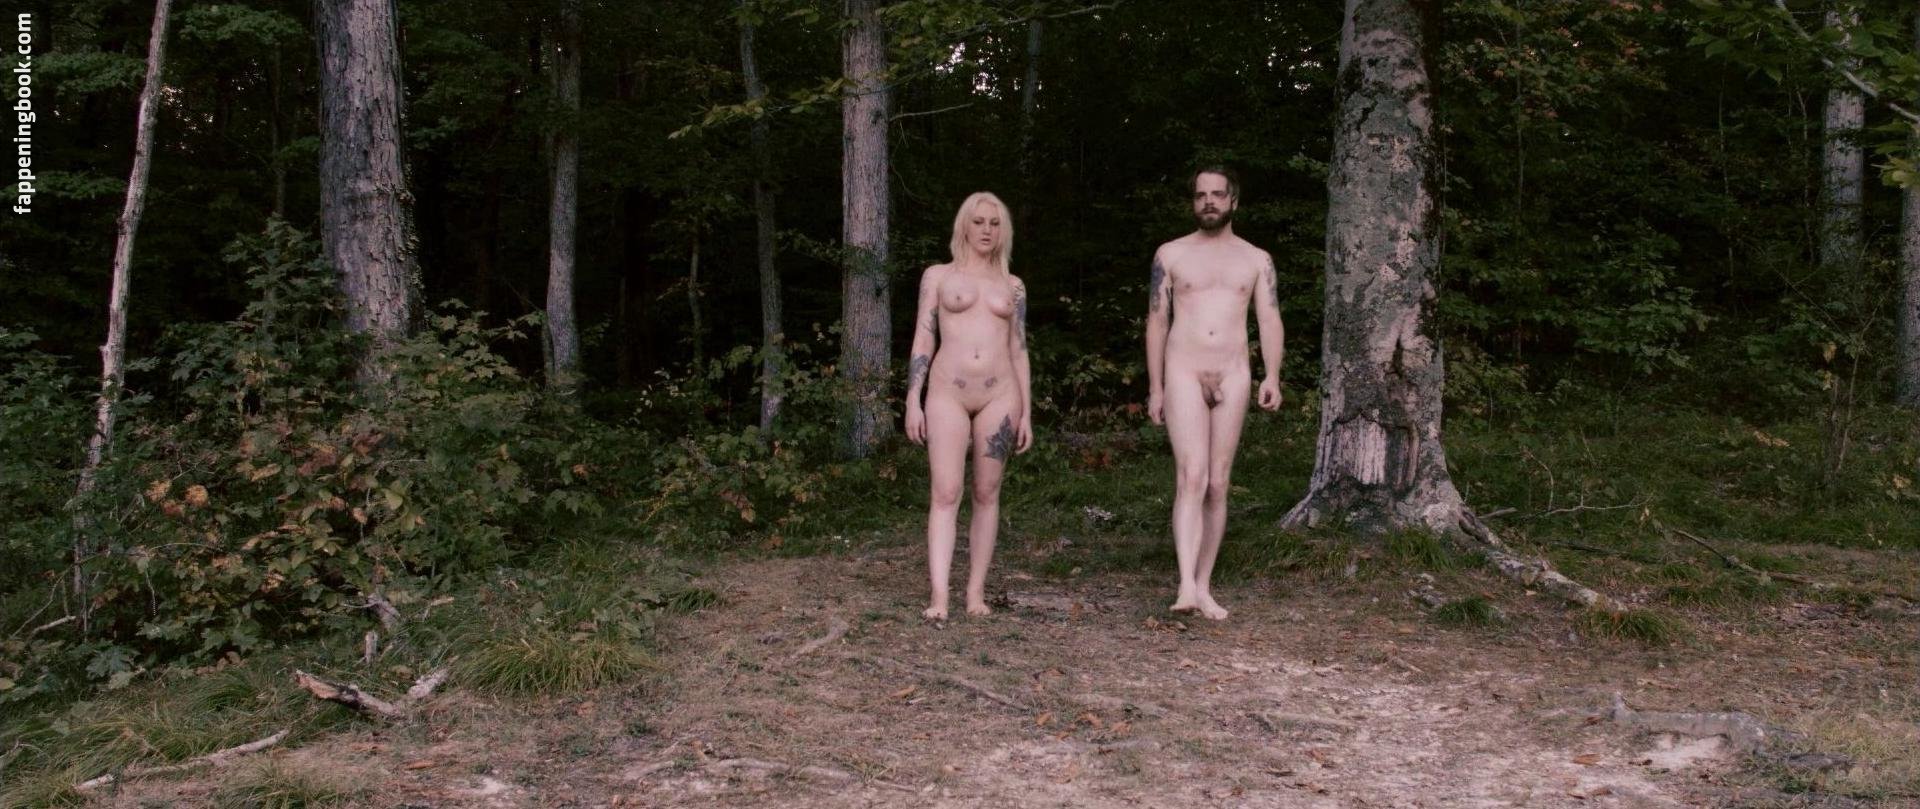 Nude Roles in Movies: Harvest Lake (2016)... 